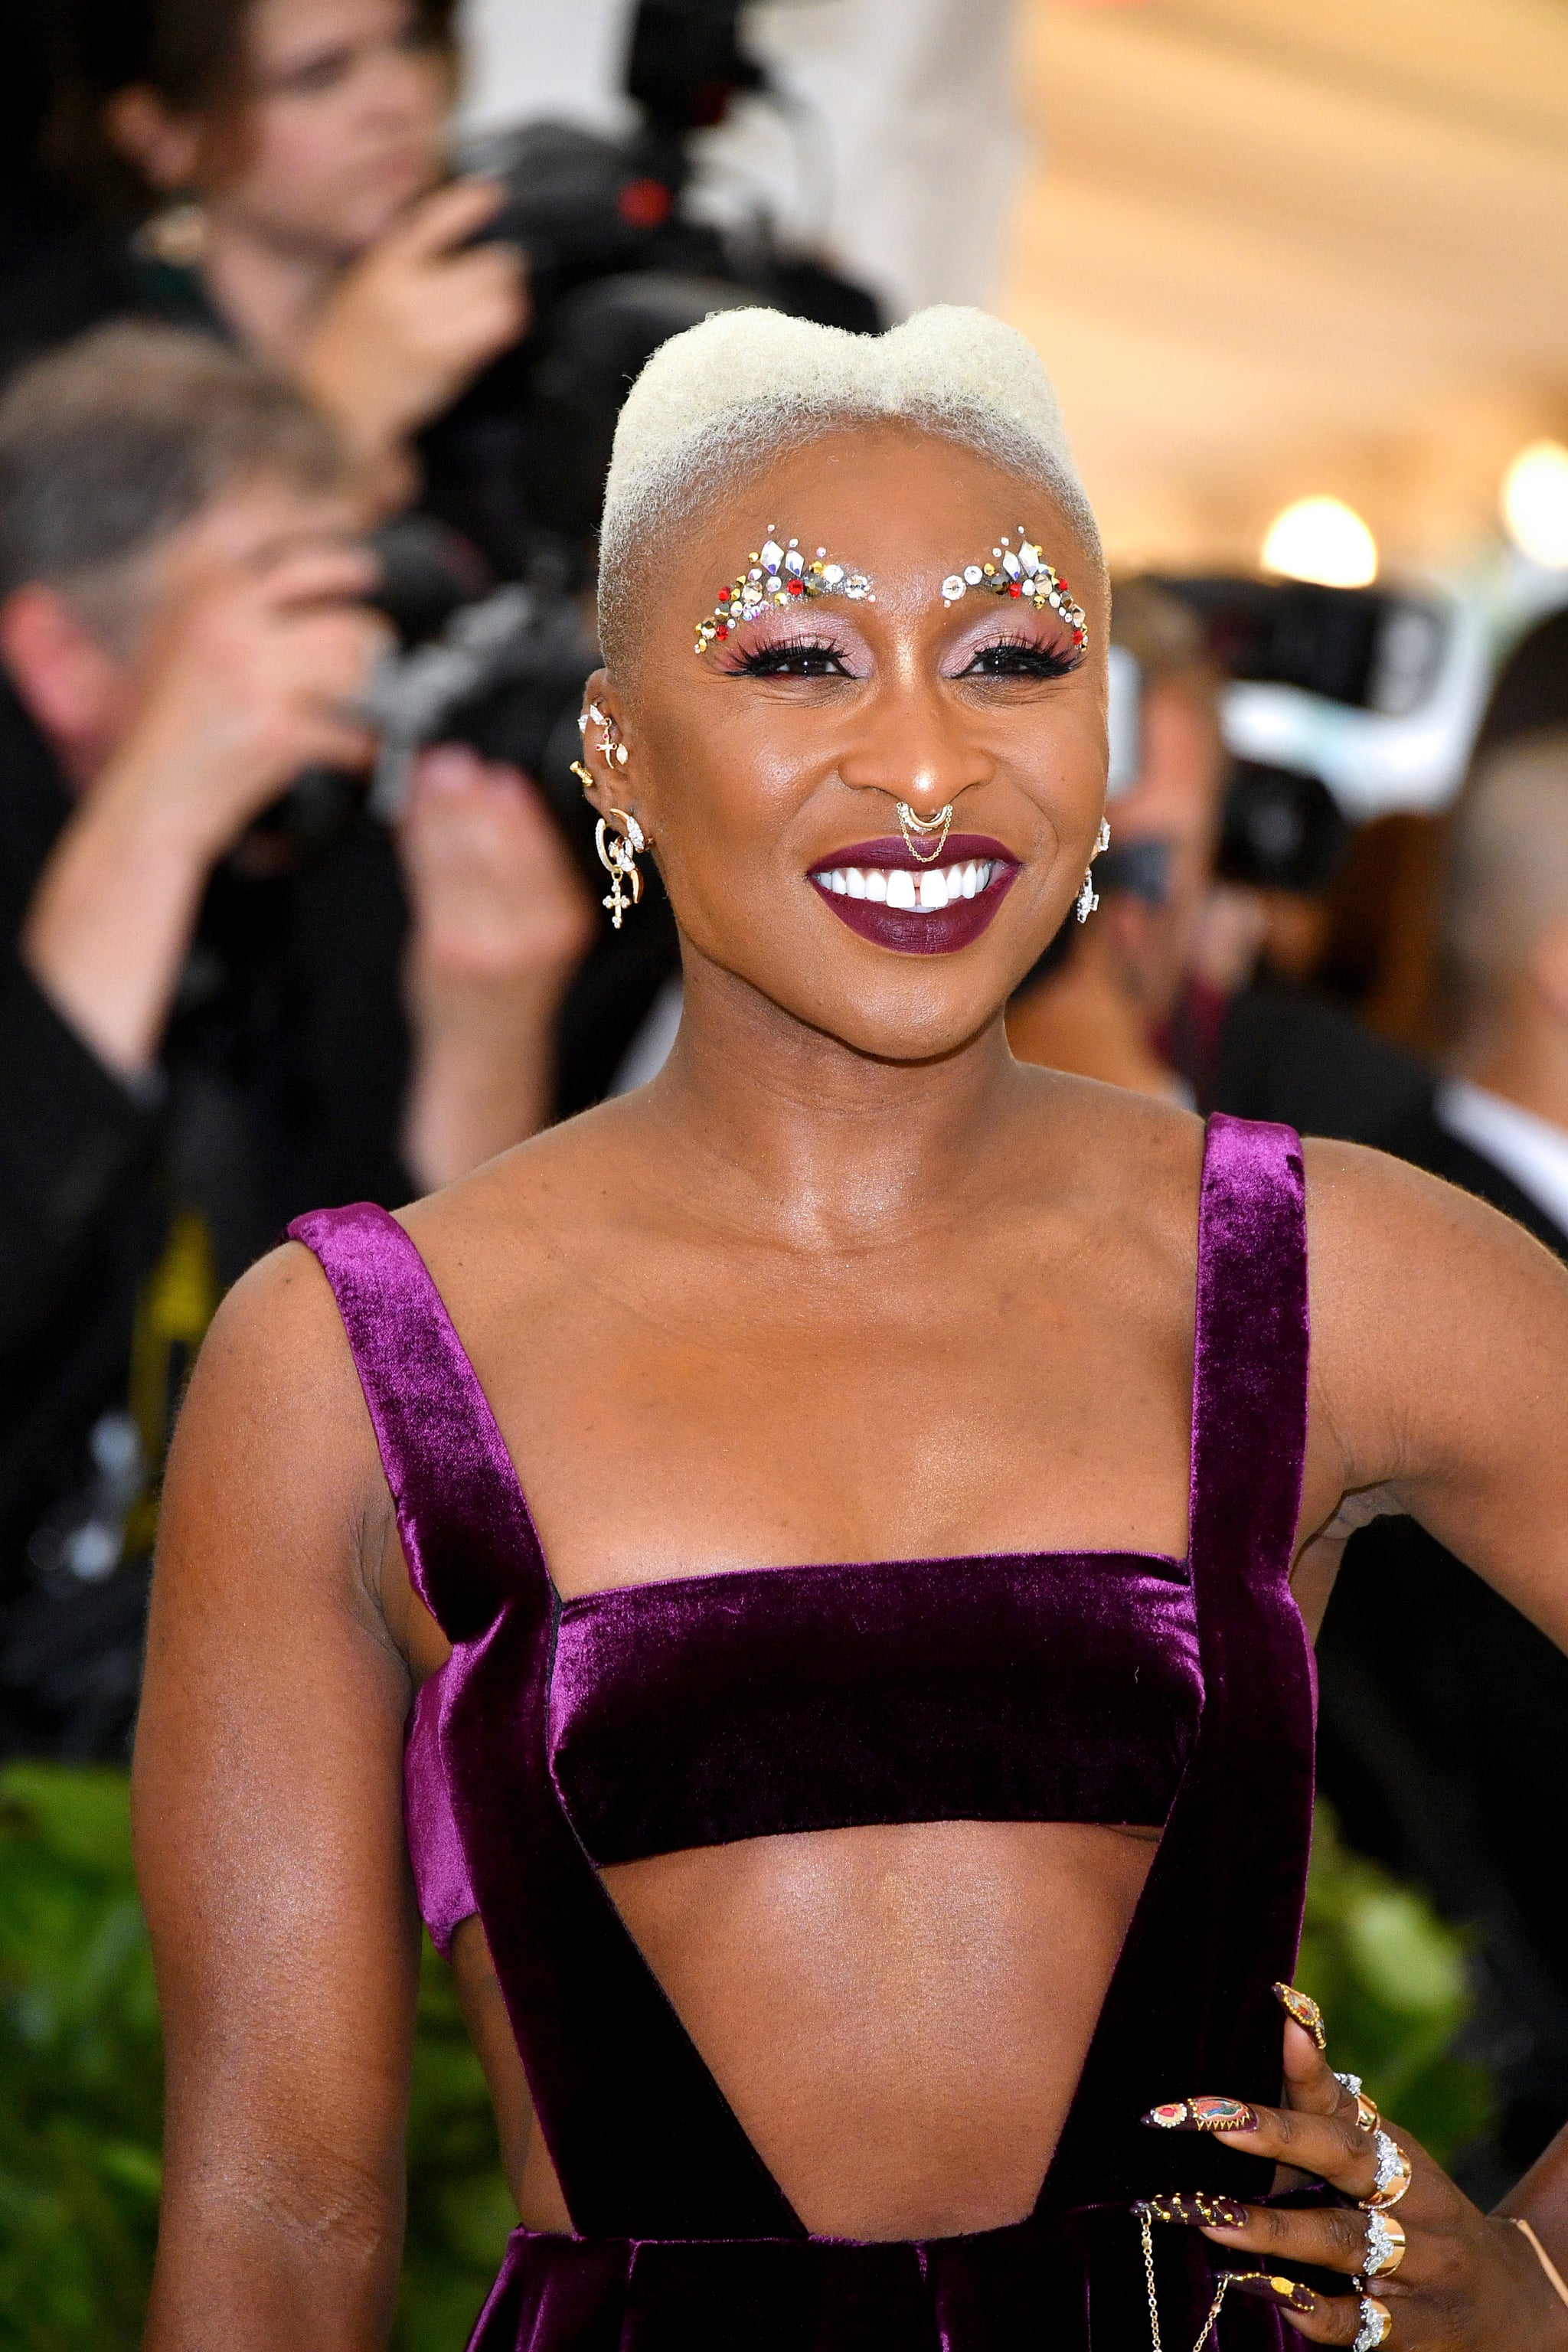 NEW YORK, NY - MAY 07:  Cynthia Erivo attends the Heavenly Bodies: Fashion & The Catholic Imagination Costume Institute Gala at The Metropolitan Museum of Art on May 7, 2018 in New York City.  (Photo by Dia Dipasupil/WireImage)